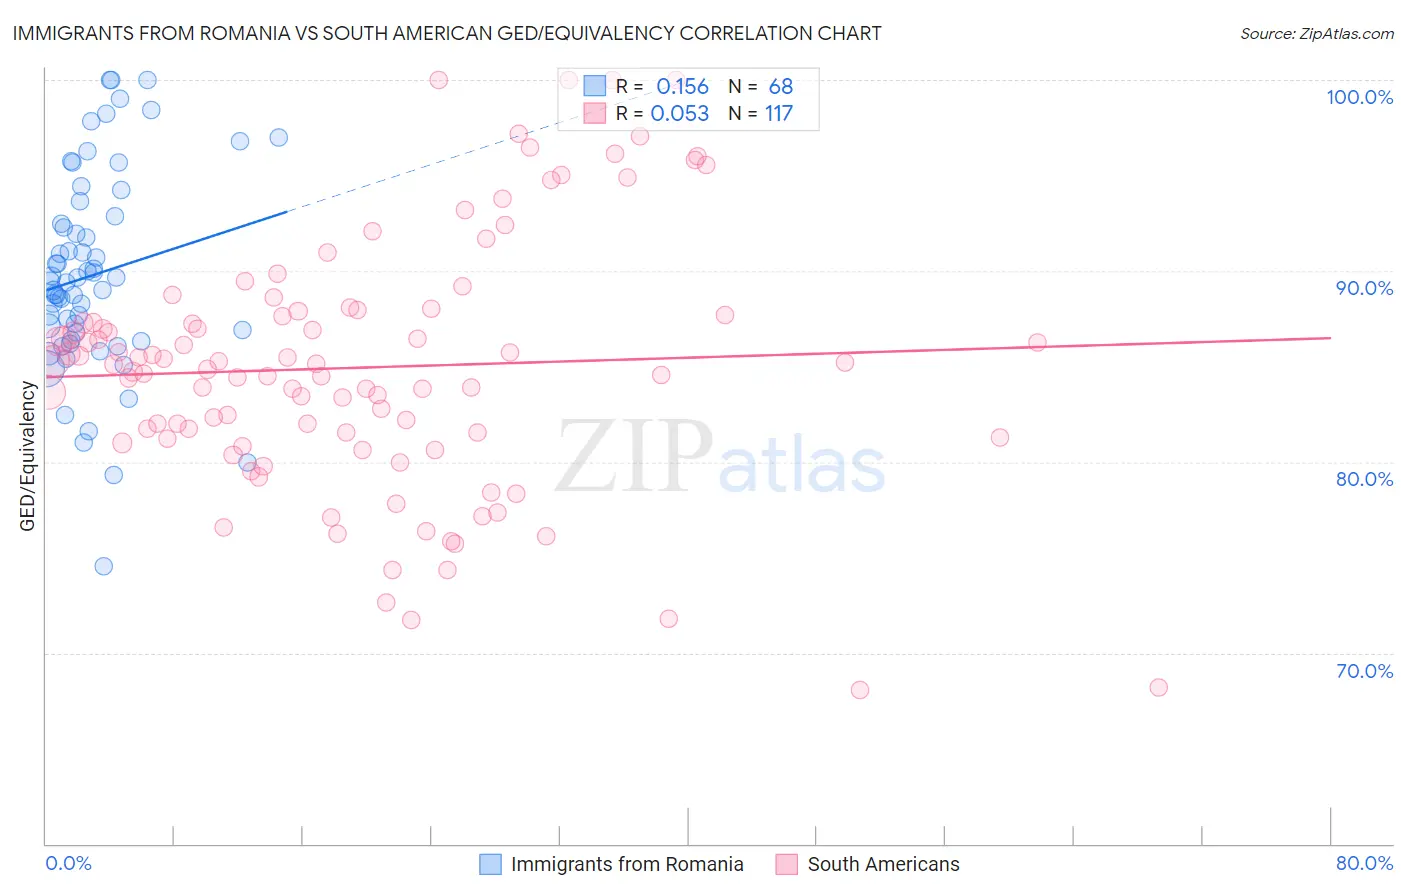 Immigrants from Romania vs South American GED/Equivalency